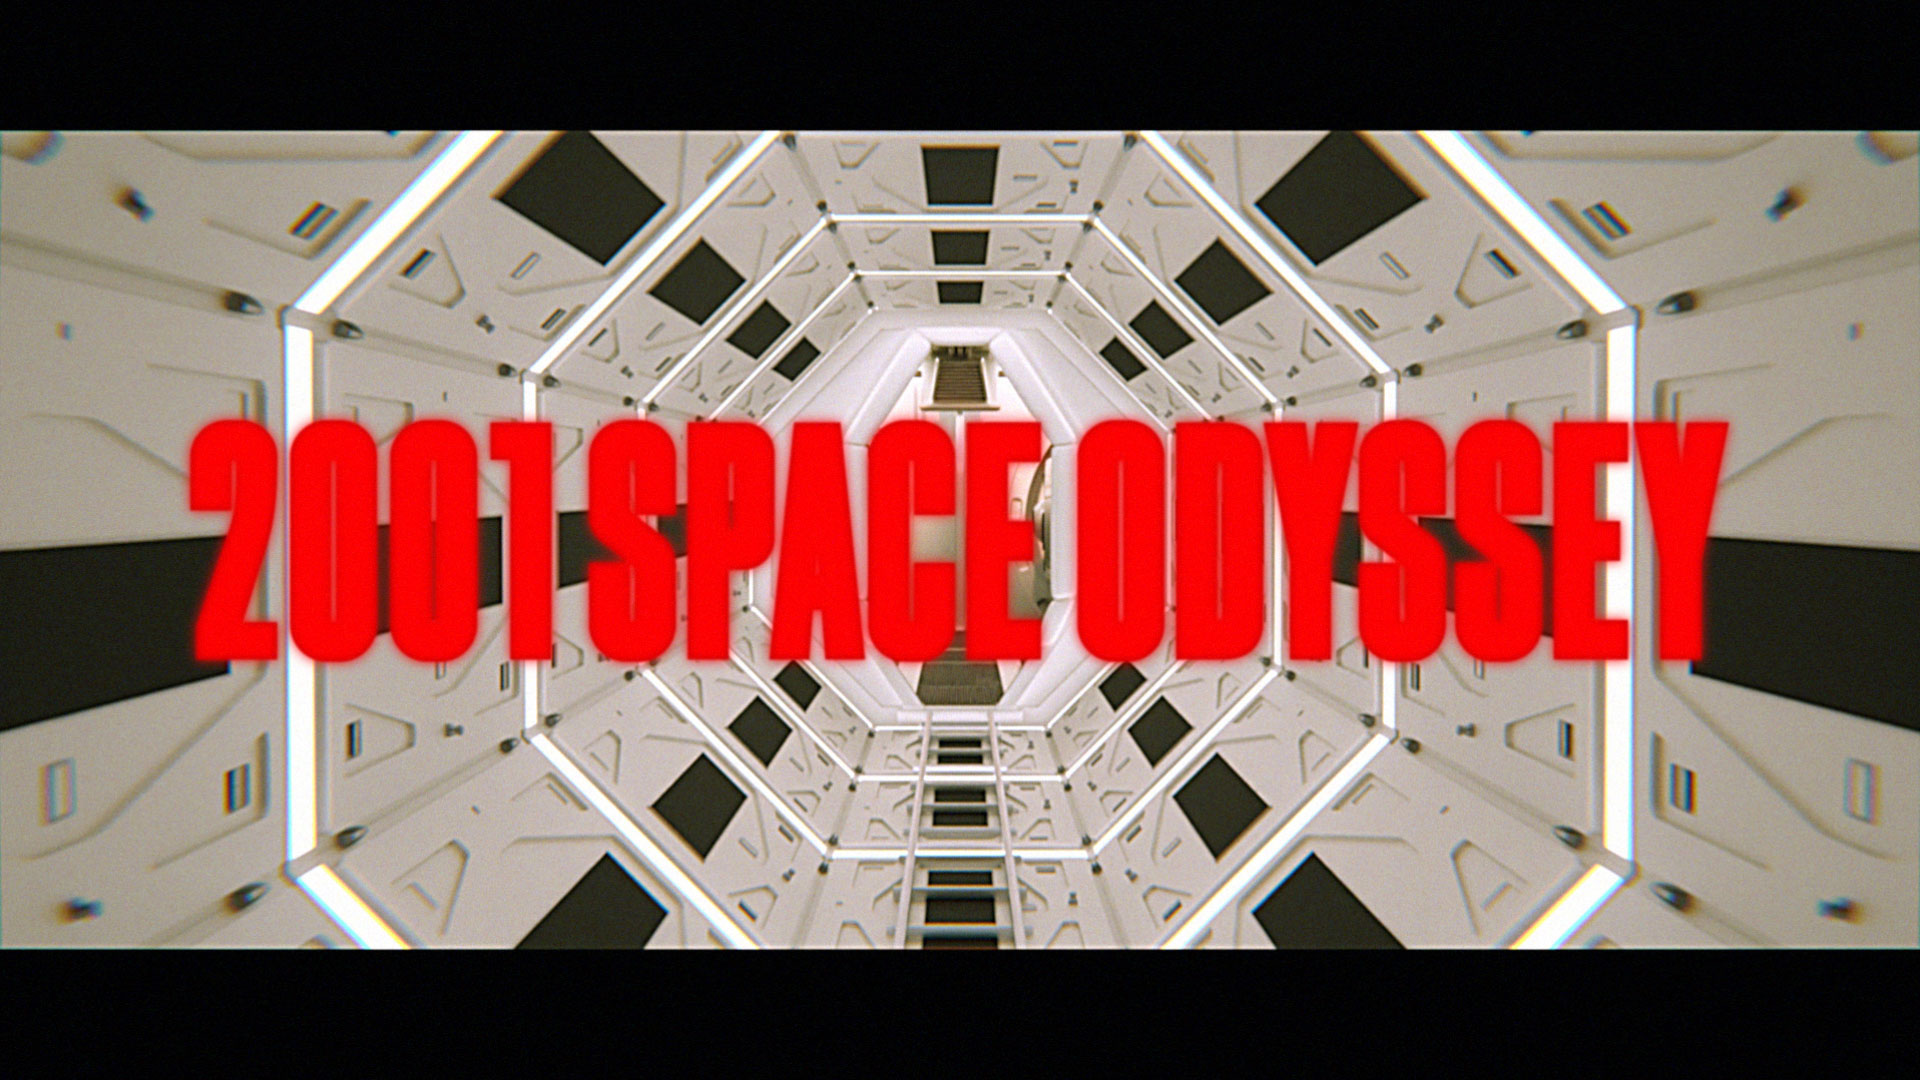 2001 space odyssey - Animations - Blender Artists Community